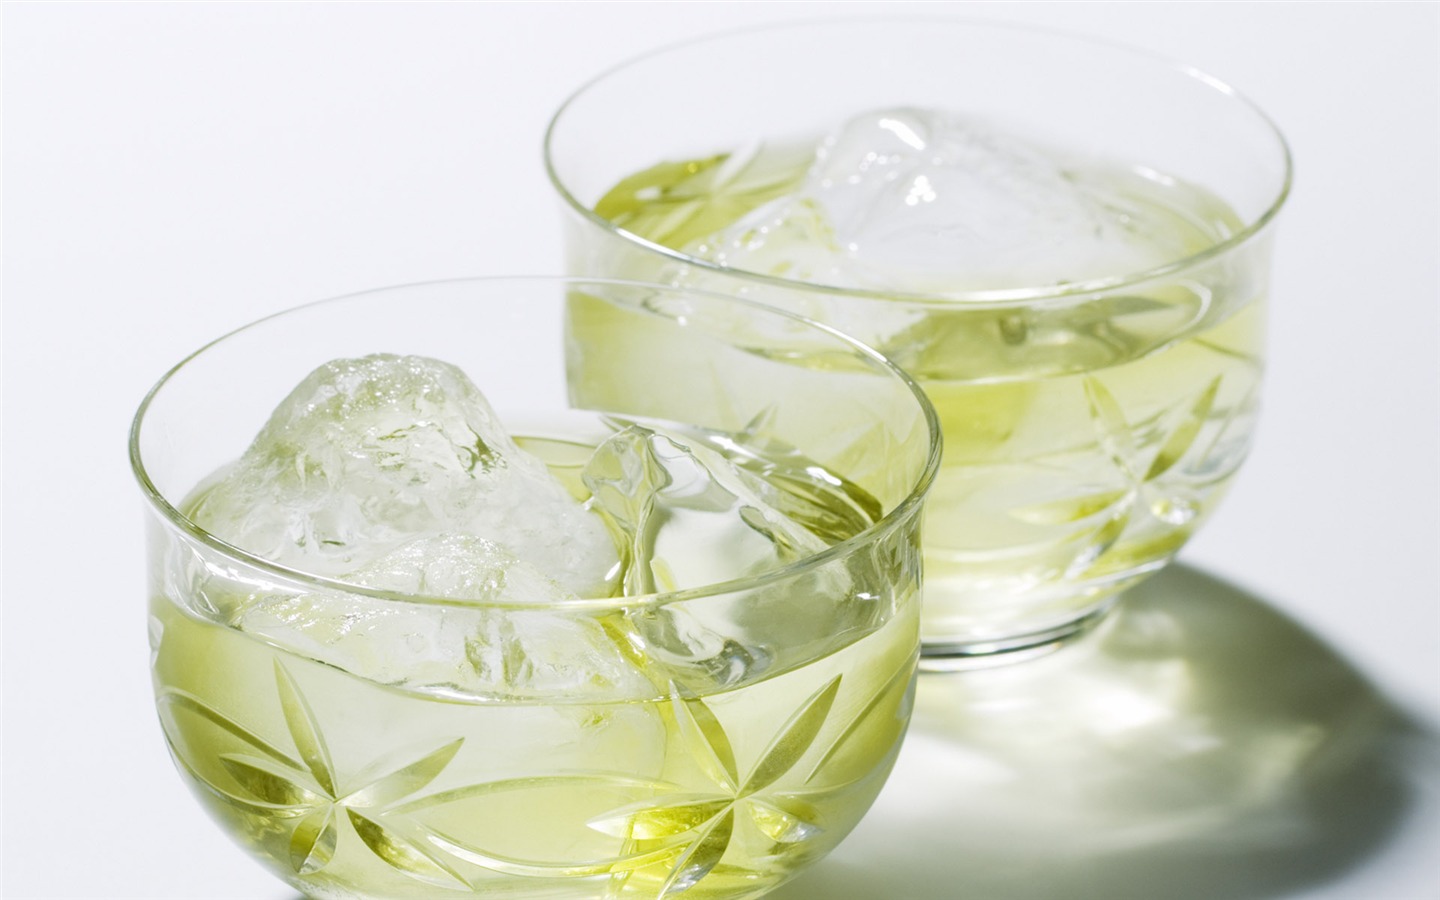 Ice-cold drinks Wallpaper #25 - 1440x900